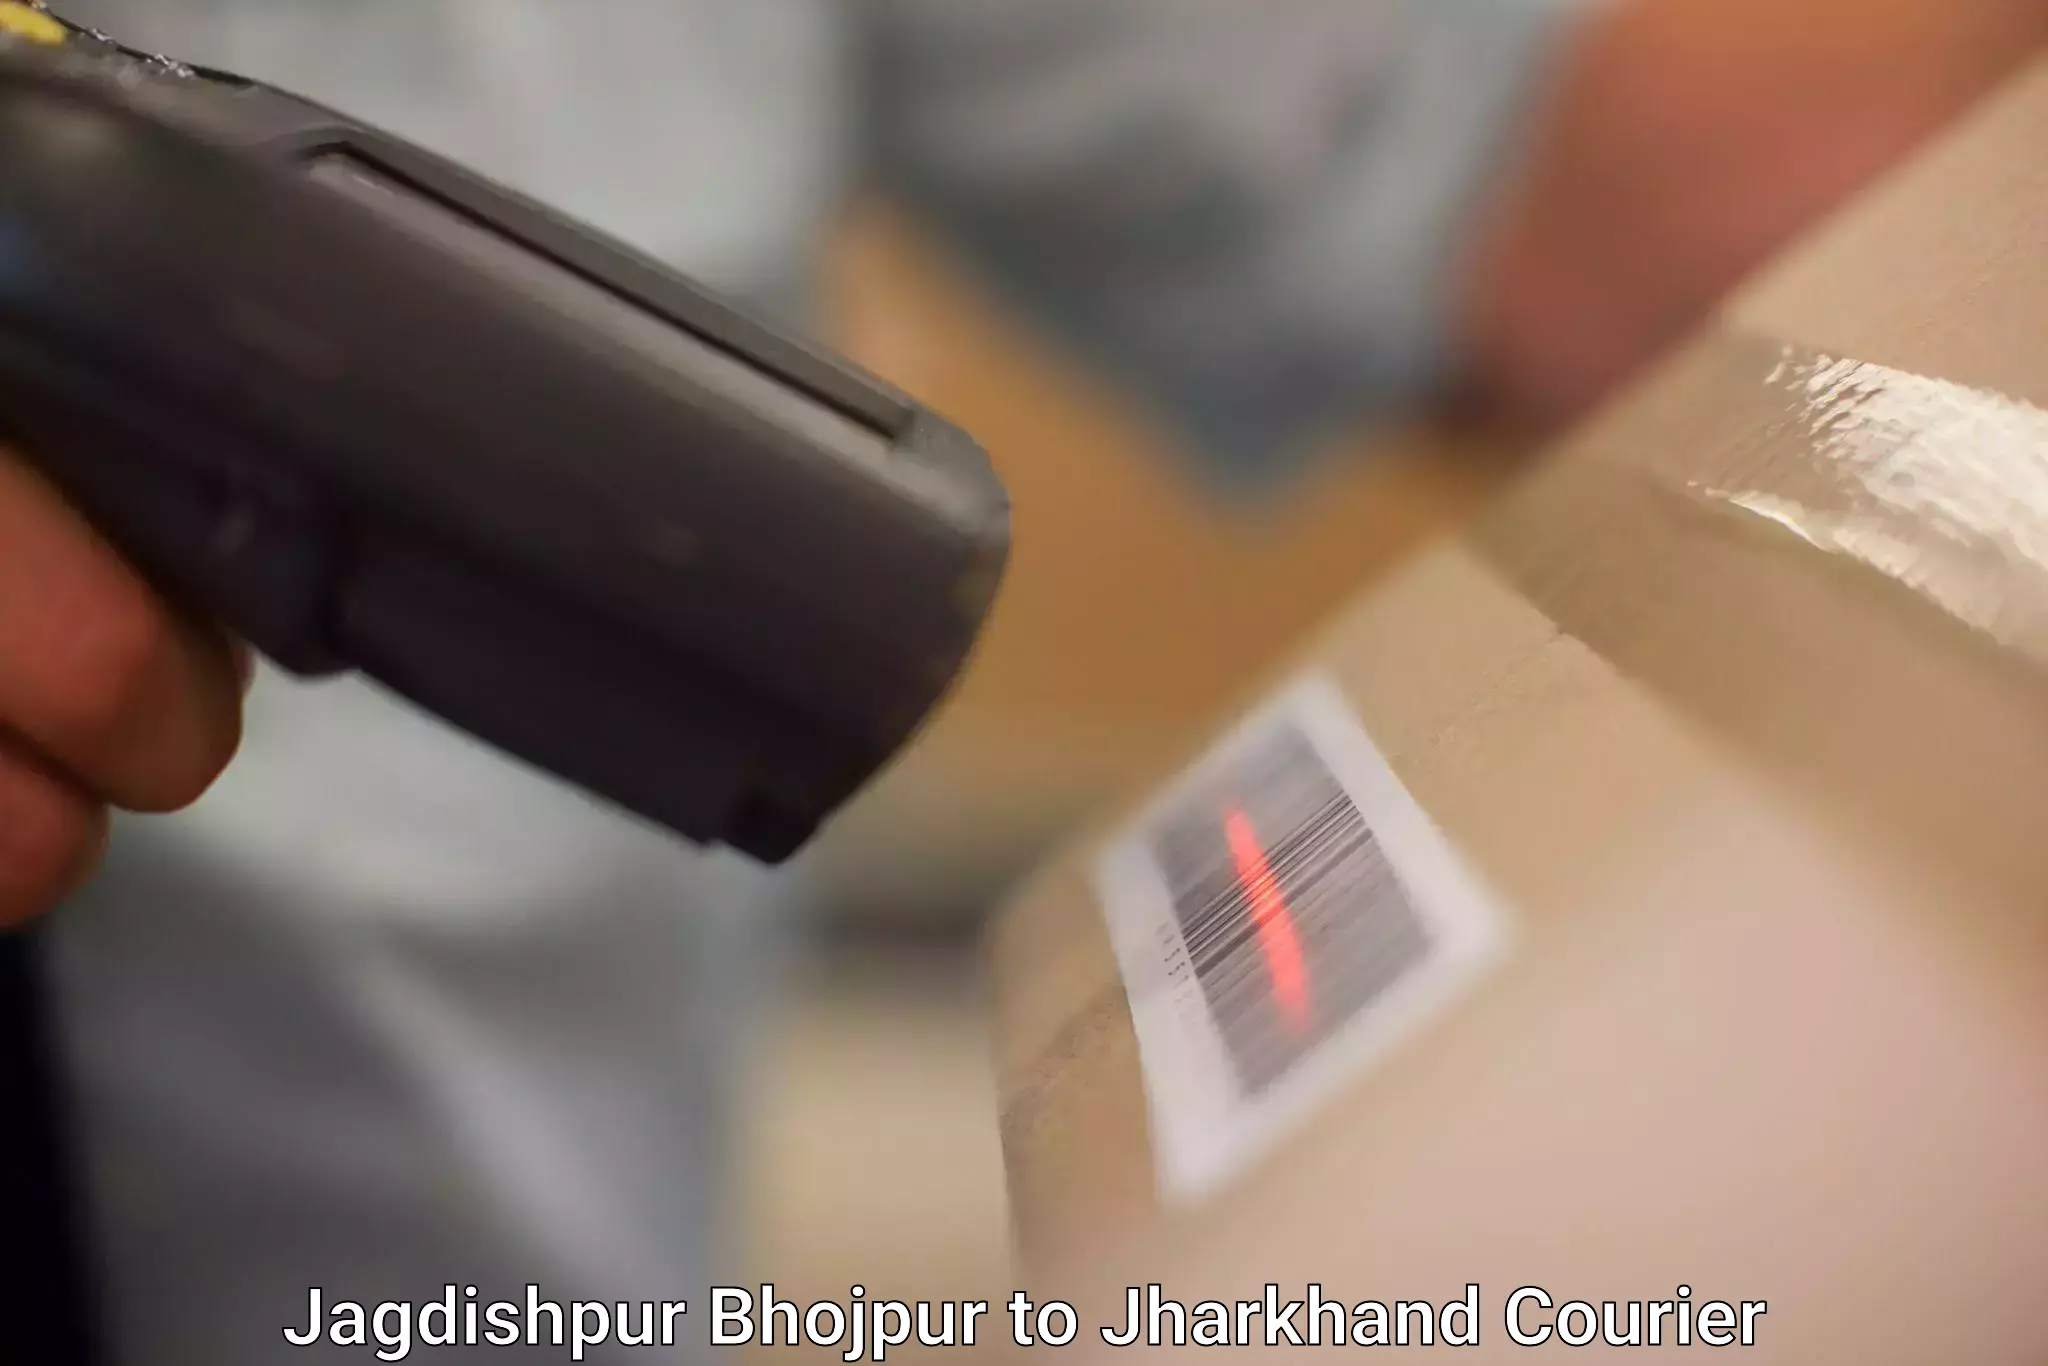 Easy access courier services Jagdishpur Bhojpur to Satbarwa